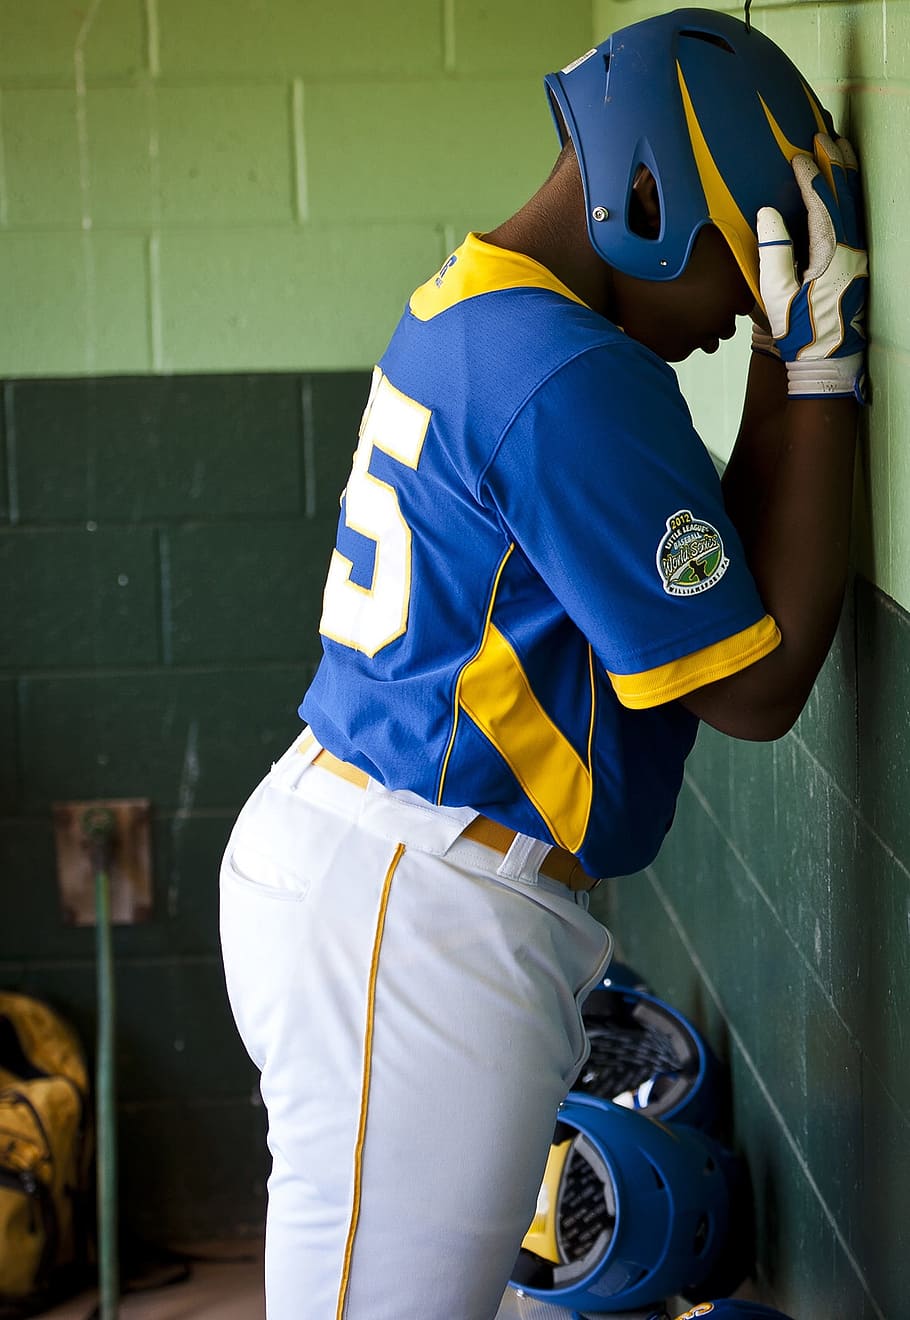 man, holding, helmet, wall, baseball player, frustration, sport, playing, action, college